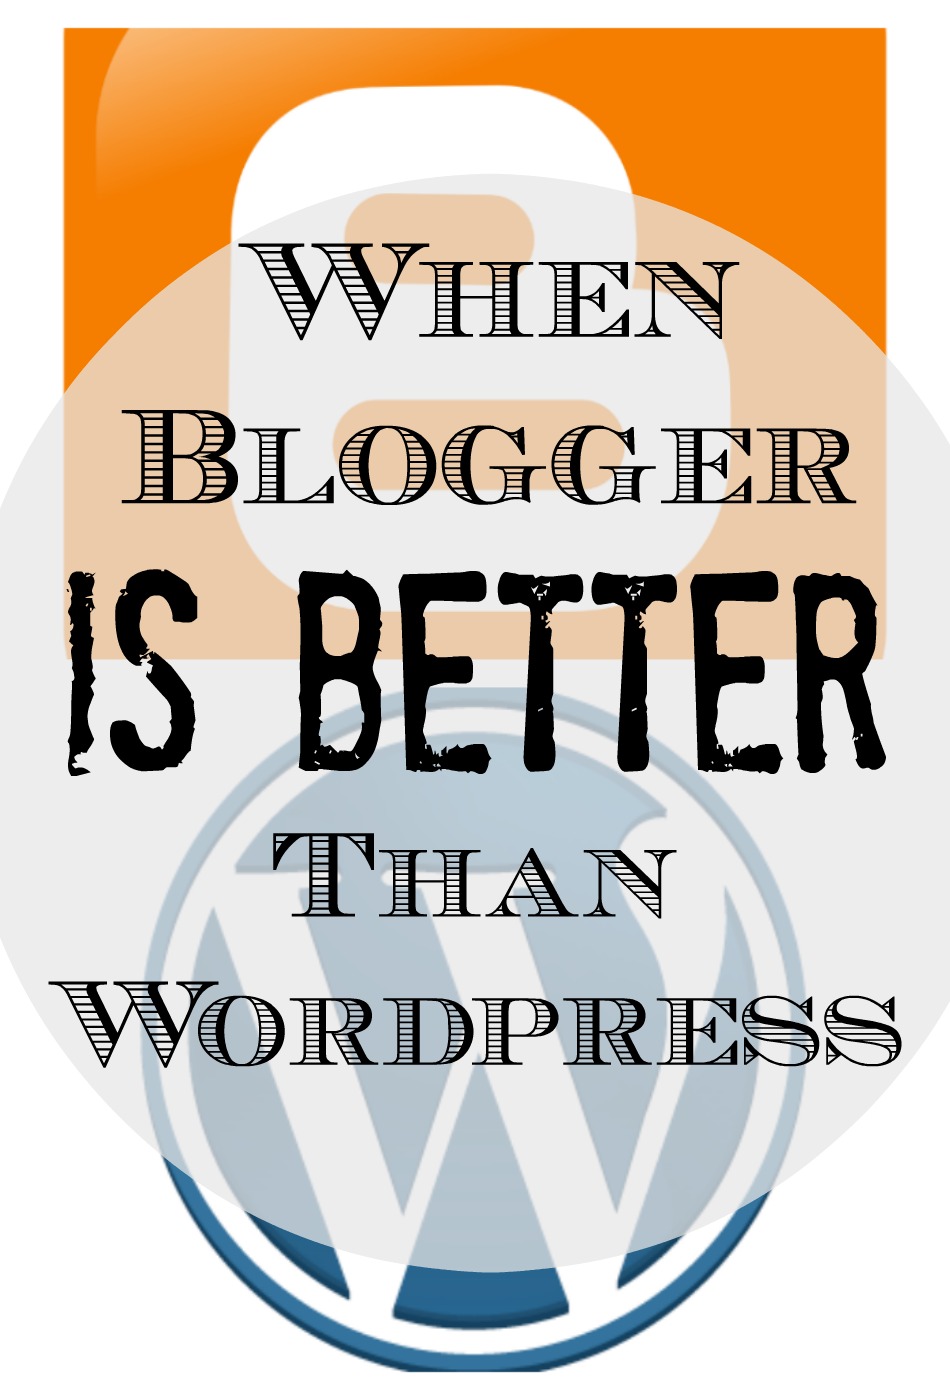 blogger or wordpress which is better